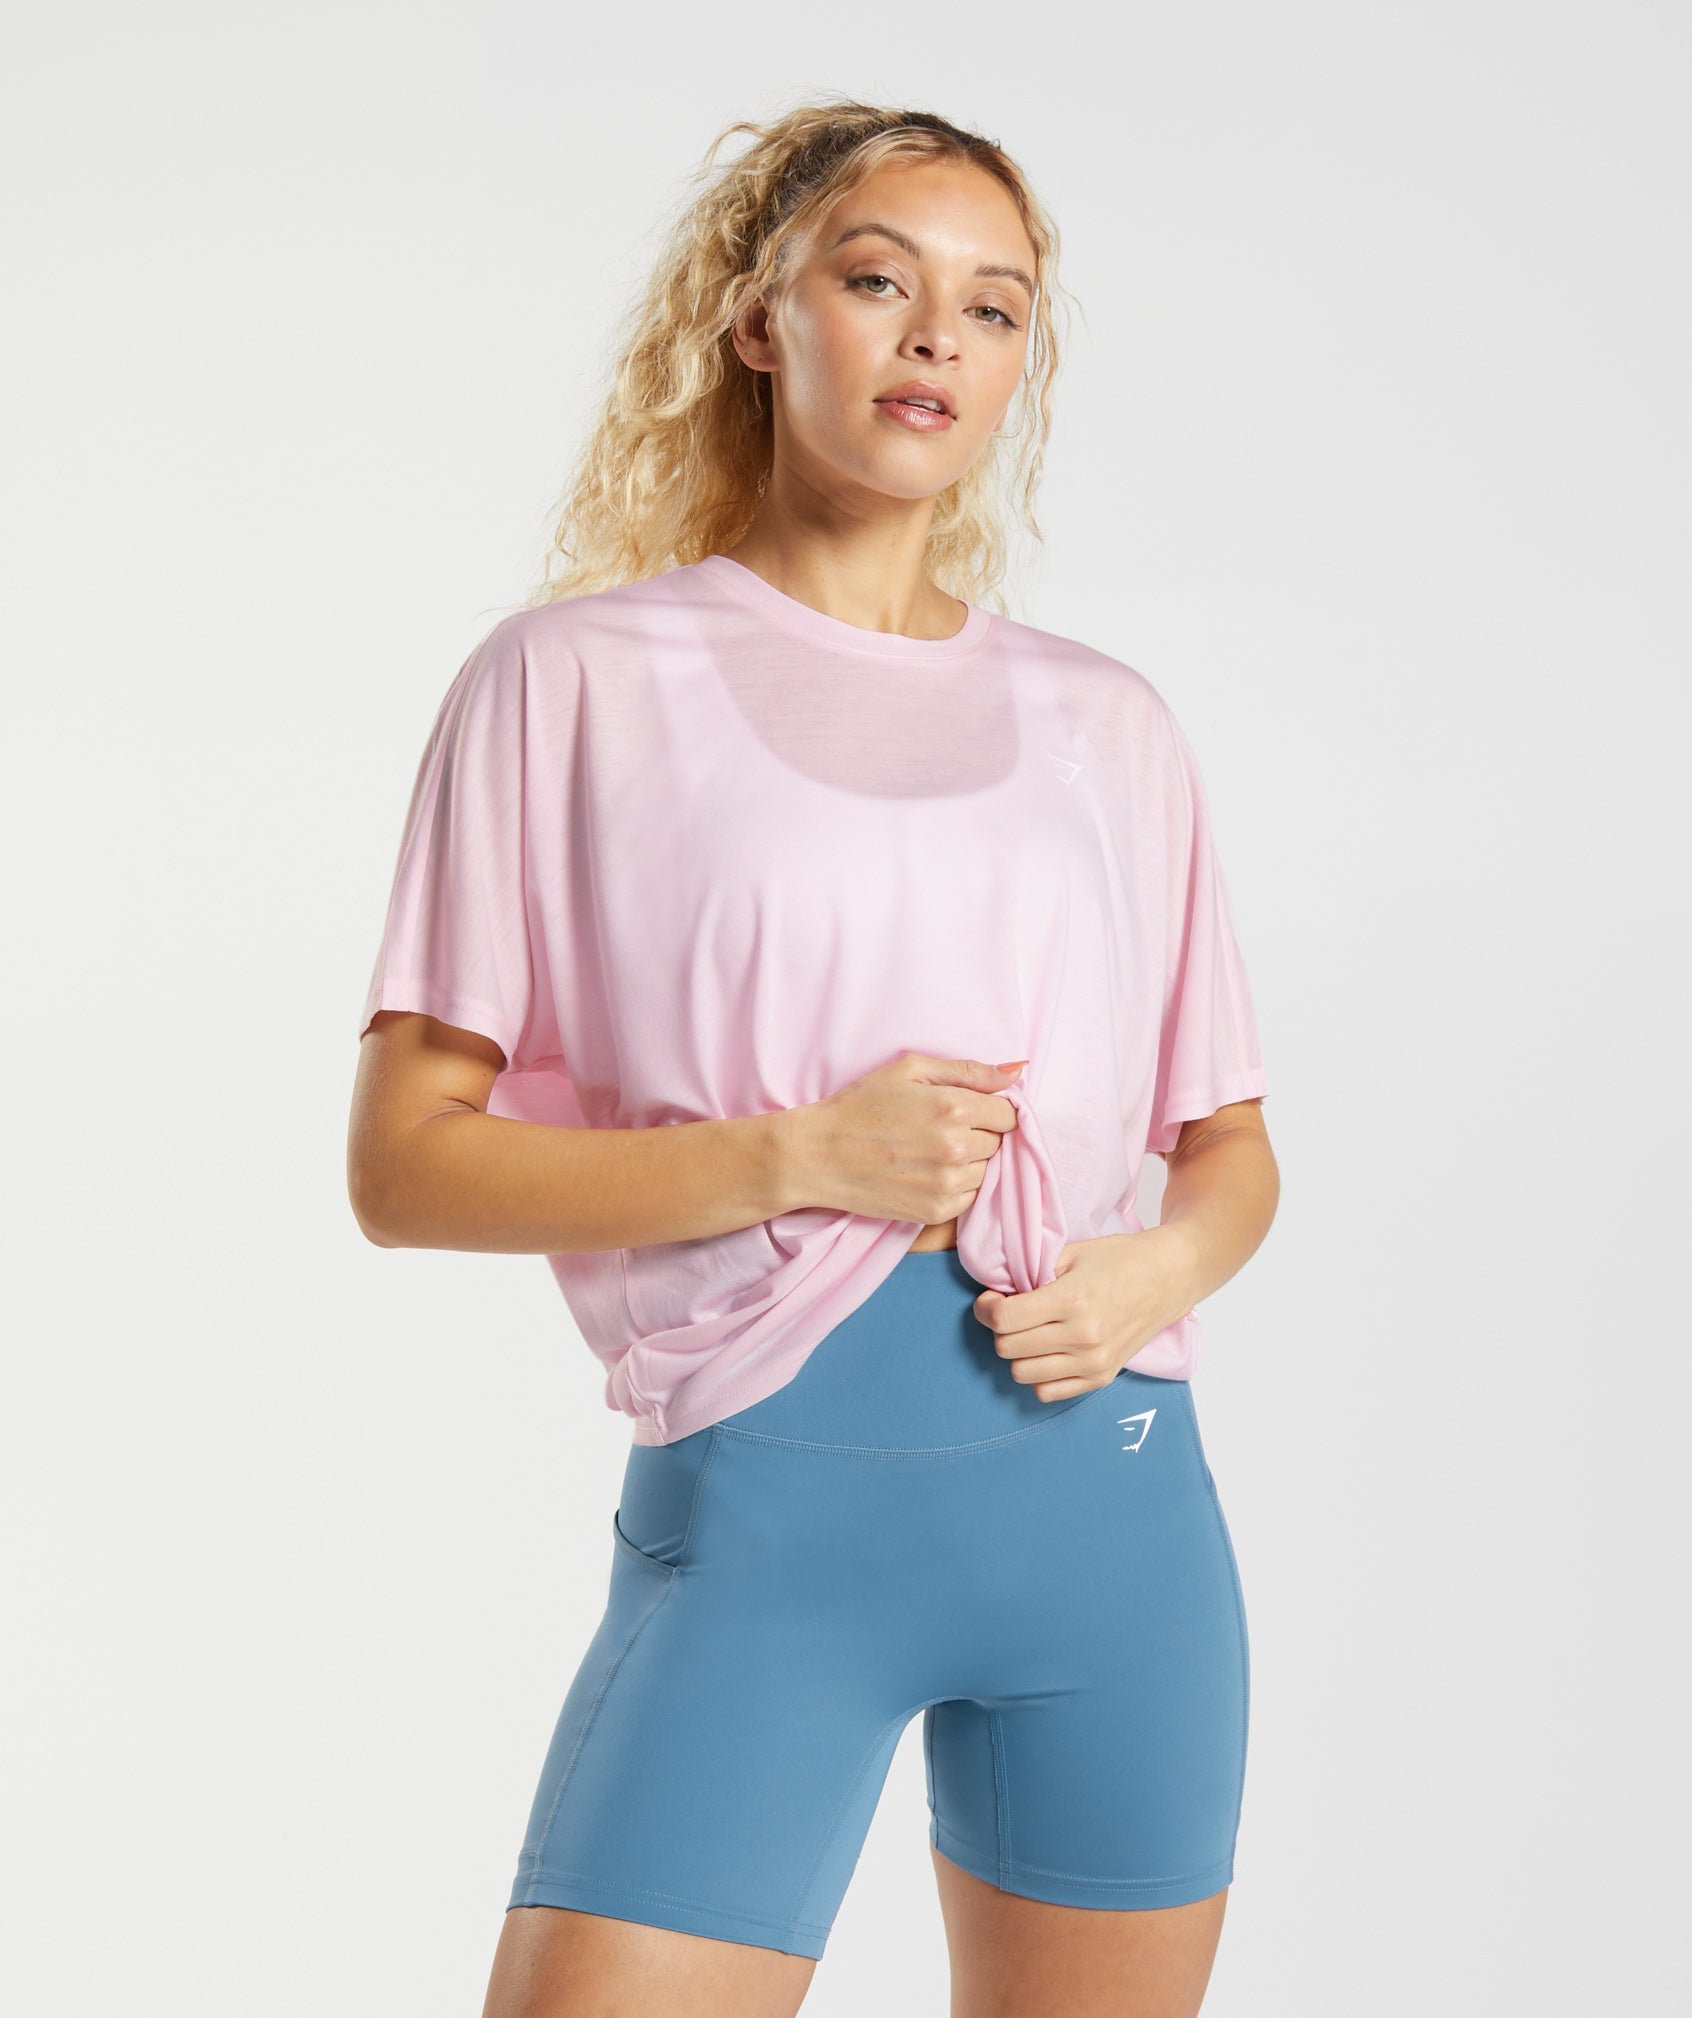 Super Soft T-Shirt in Chalk Pink - view 1